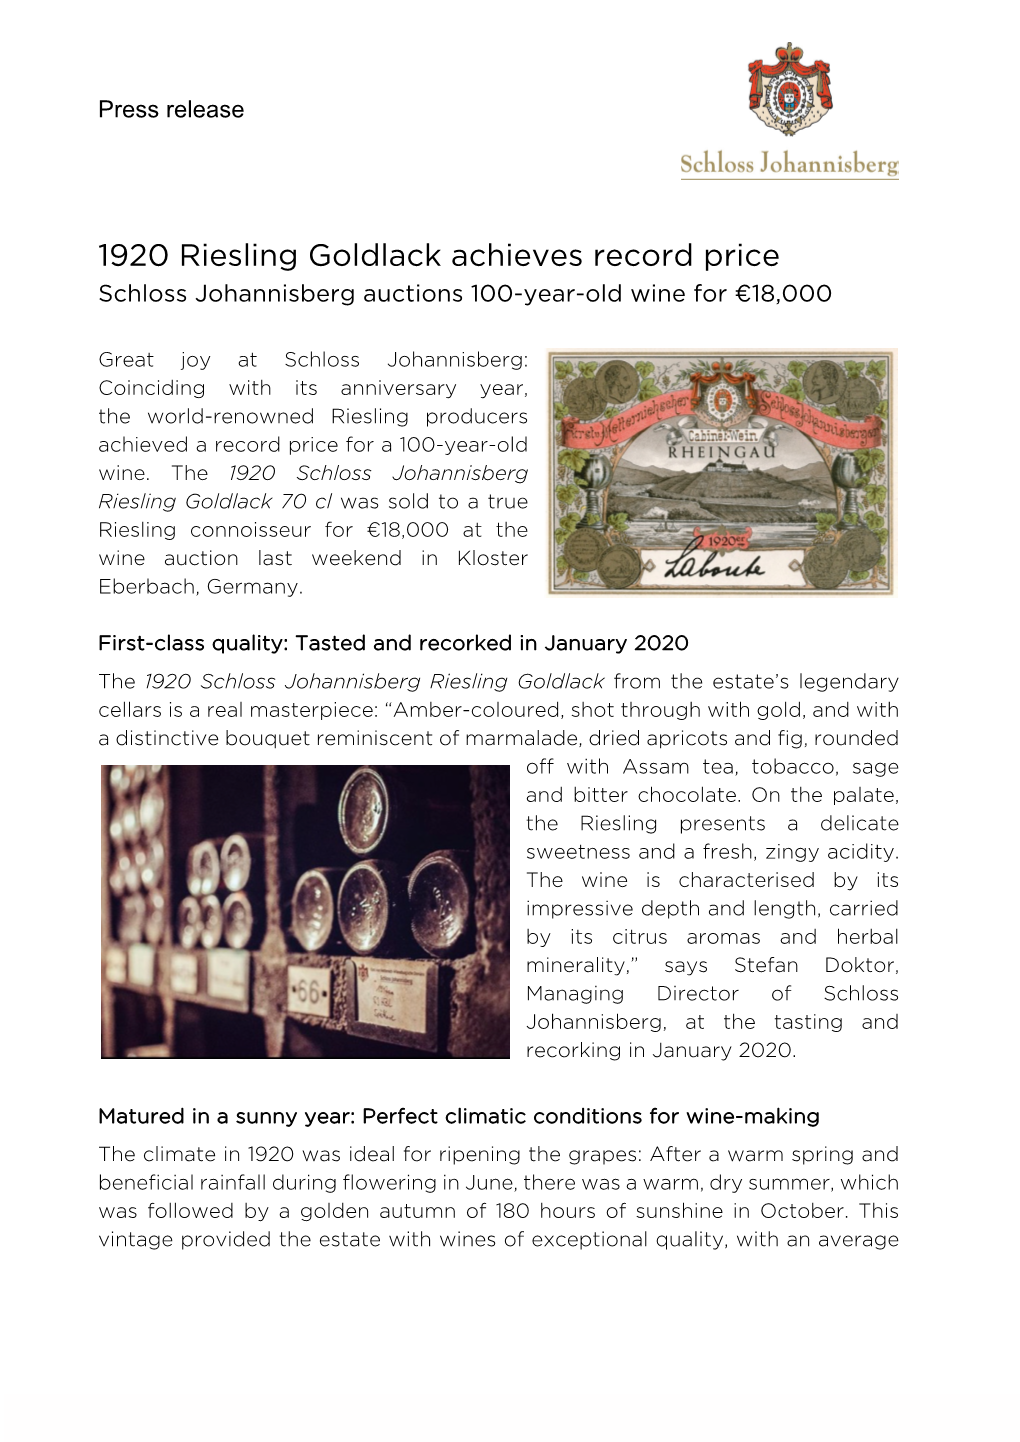 1920 Riesling Goldlack Achieves Record Price Schloss Johannisberg Auctions 100-Year-Old Wine for €18,000